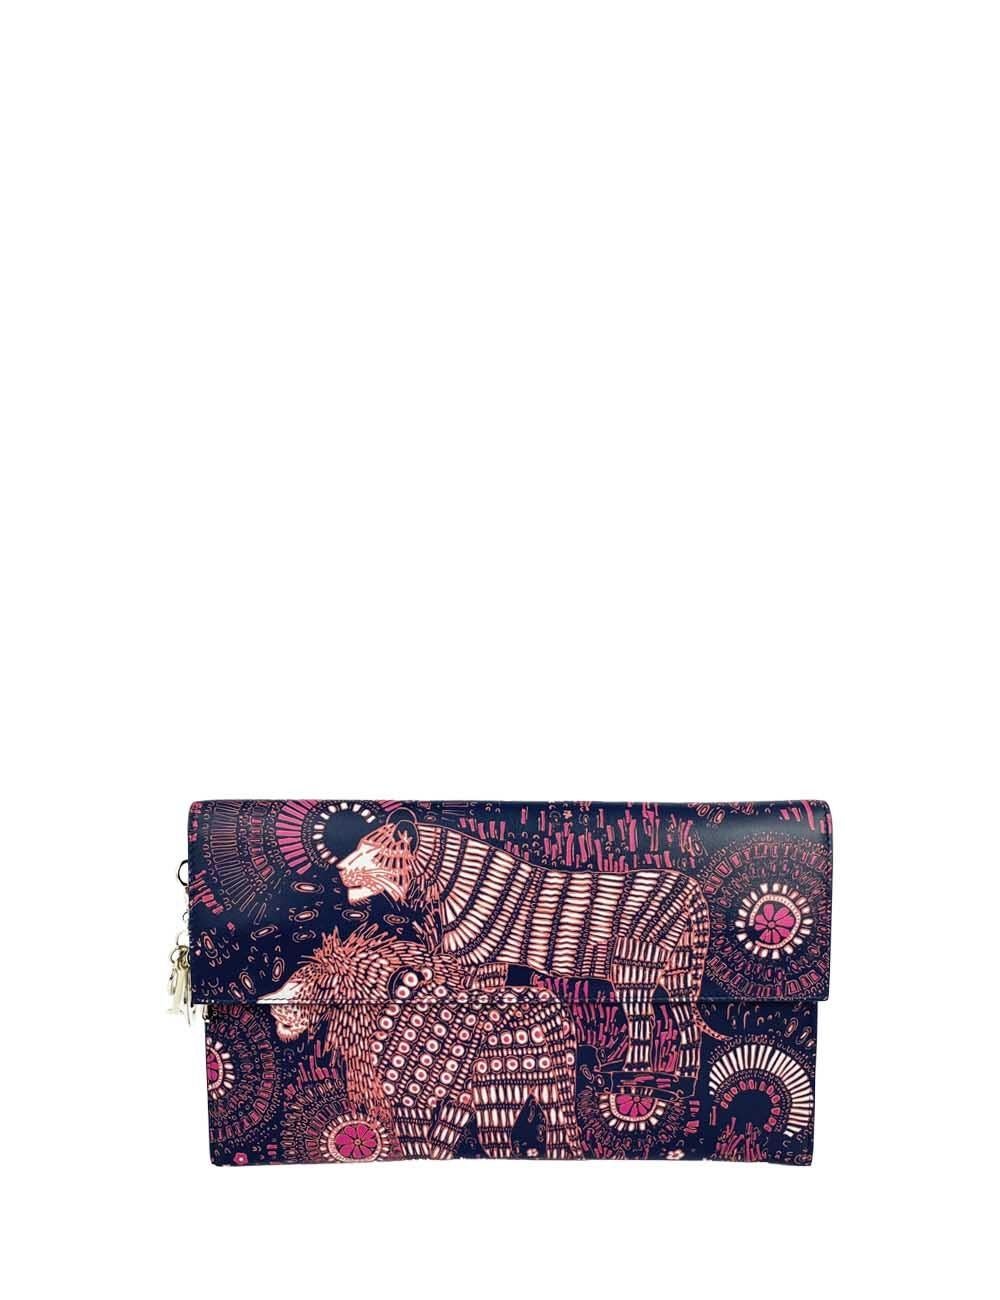 Christian Dior Lady Dior 3in1 jungle print multi-color clutch. Includes a smaller giraffe print pouch and a monkey print mini pouch. Has not been used however tag has been removed. 

Additional information:
Material: Leather
Hardware: Silver